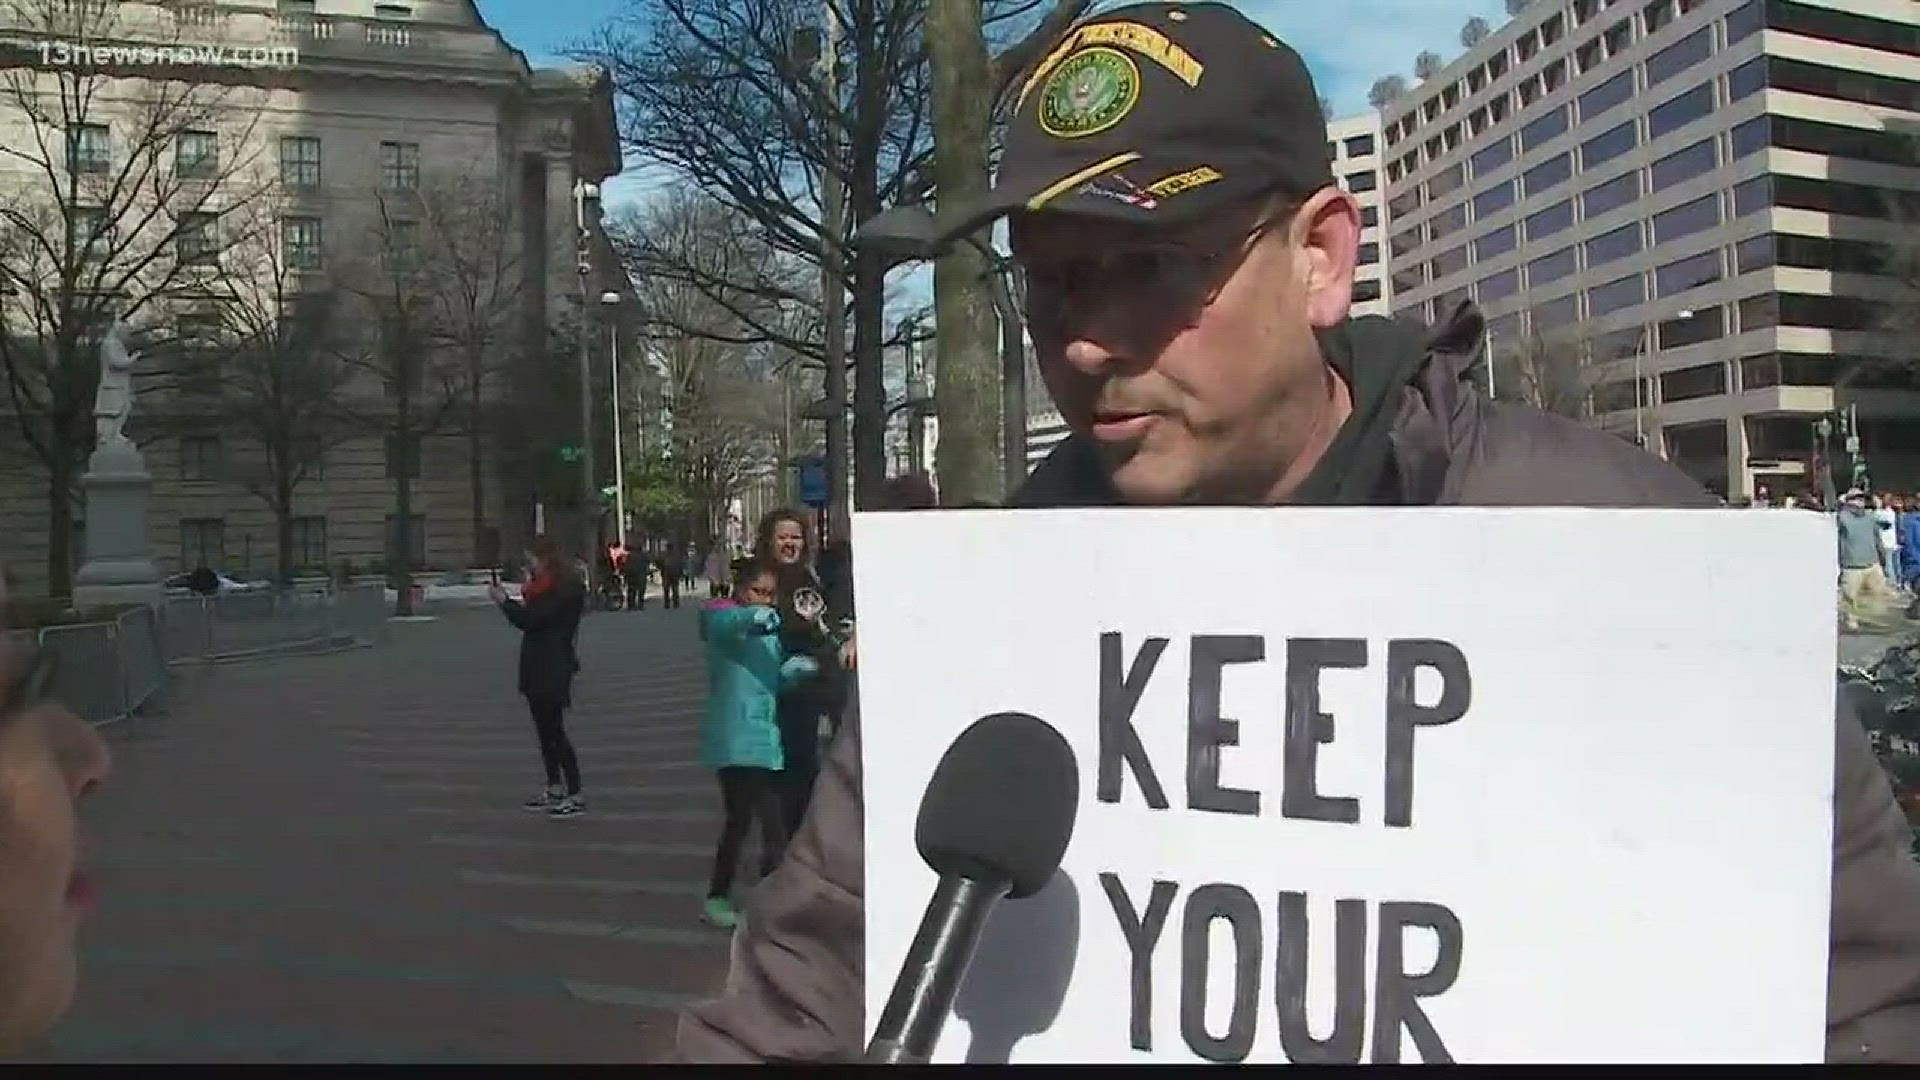 Several protesters came out in defense of the Second Amendment at Washington's March For Our Lives rally on Saturday.